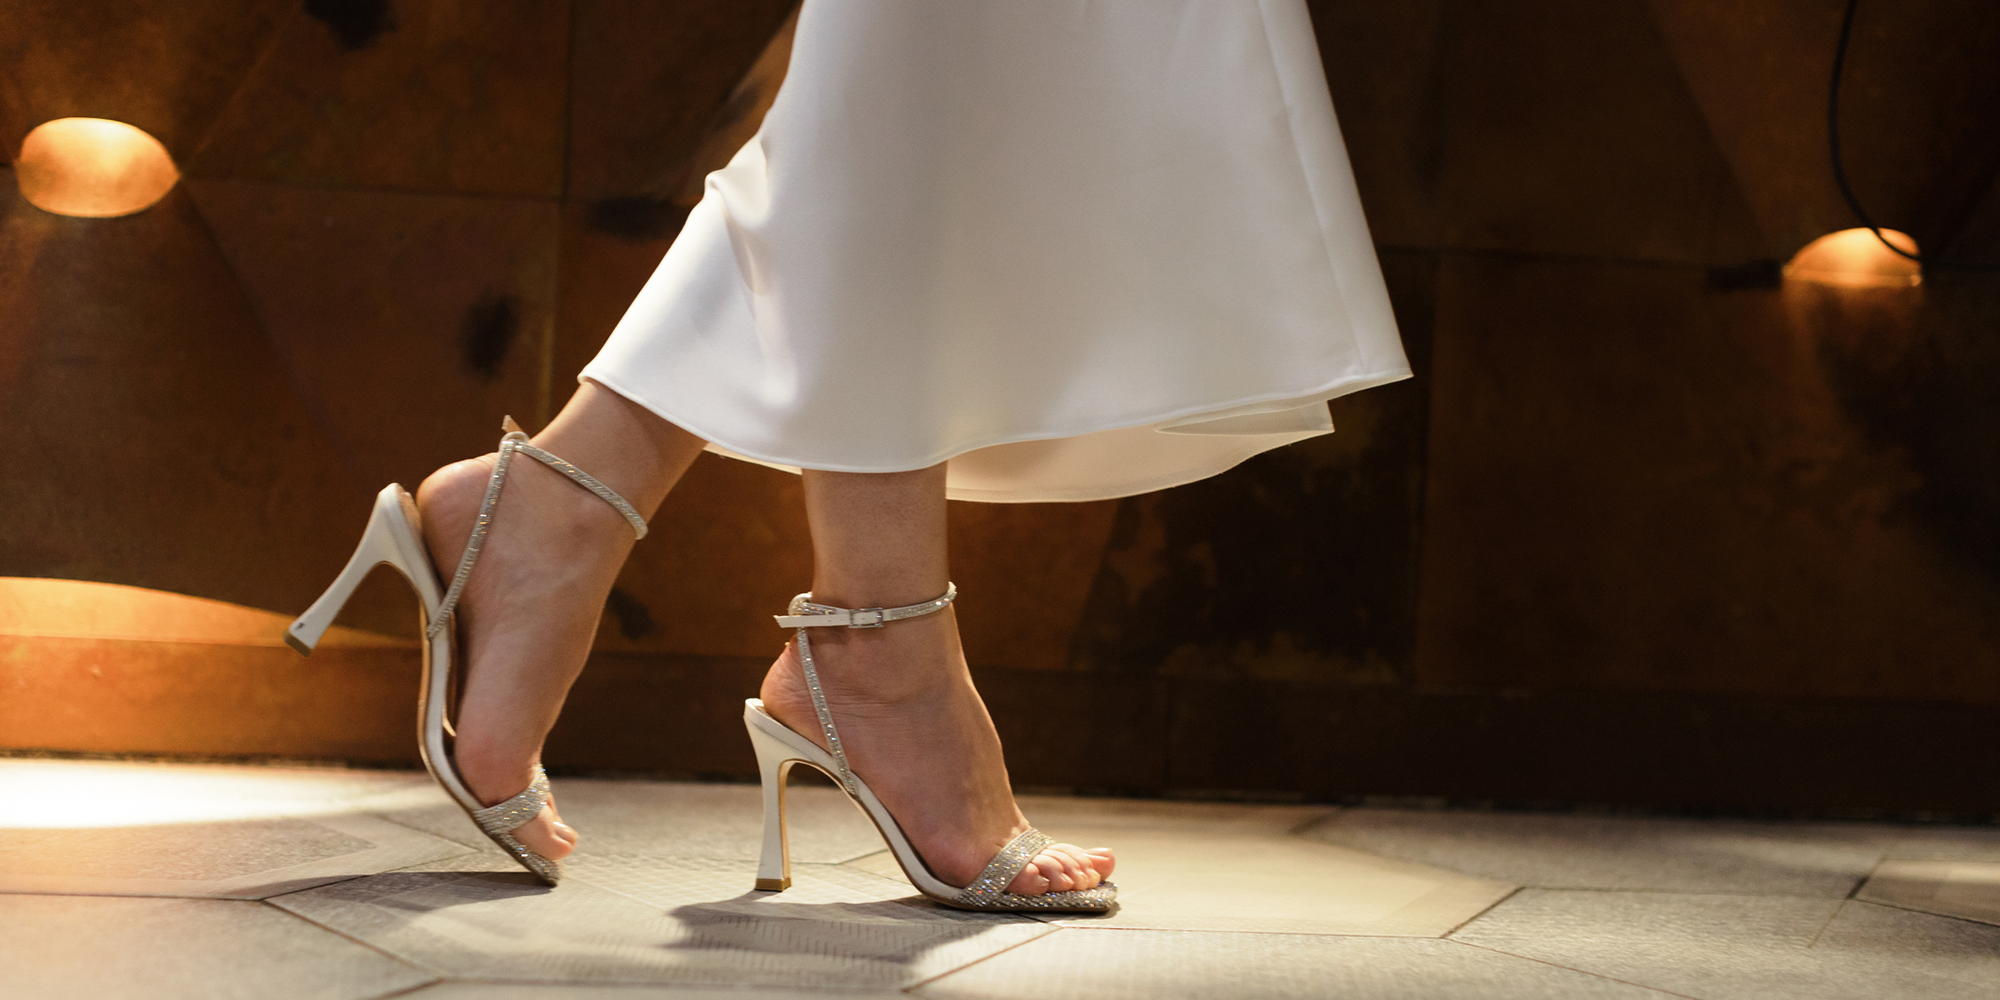 How to walk in high heels without pain, according to an expert